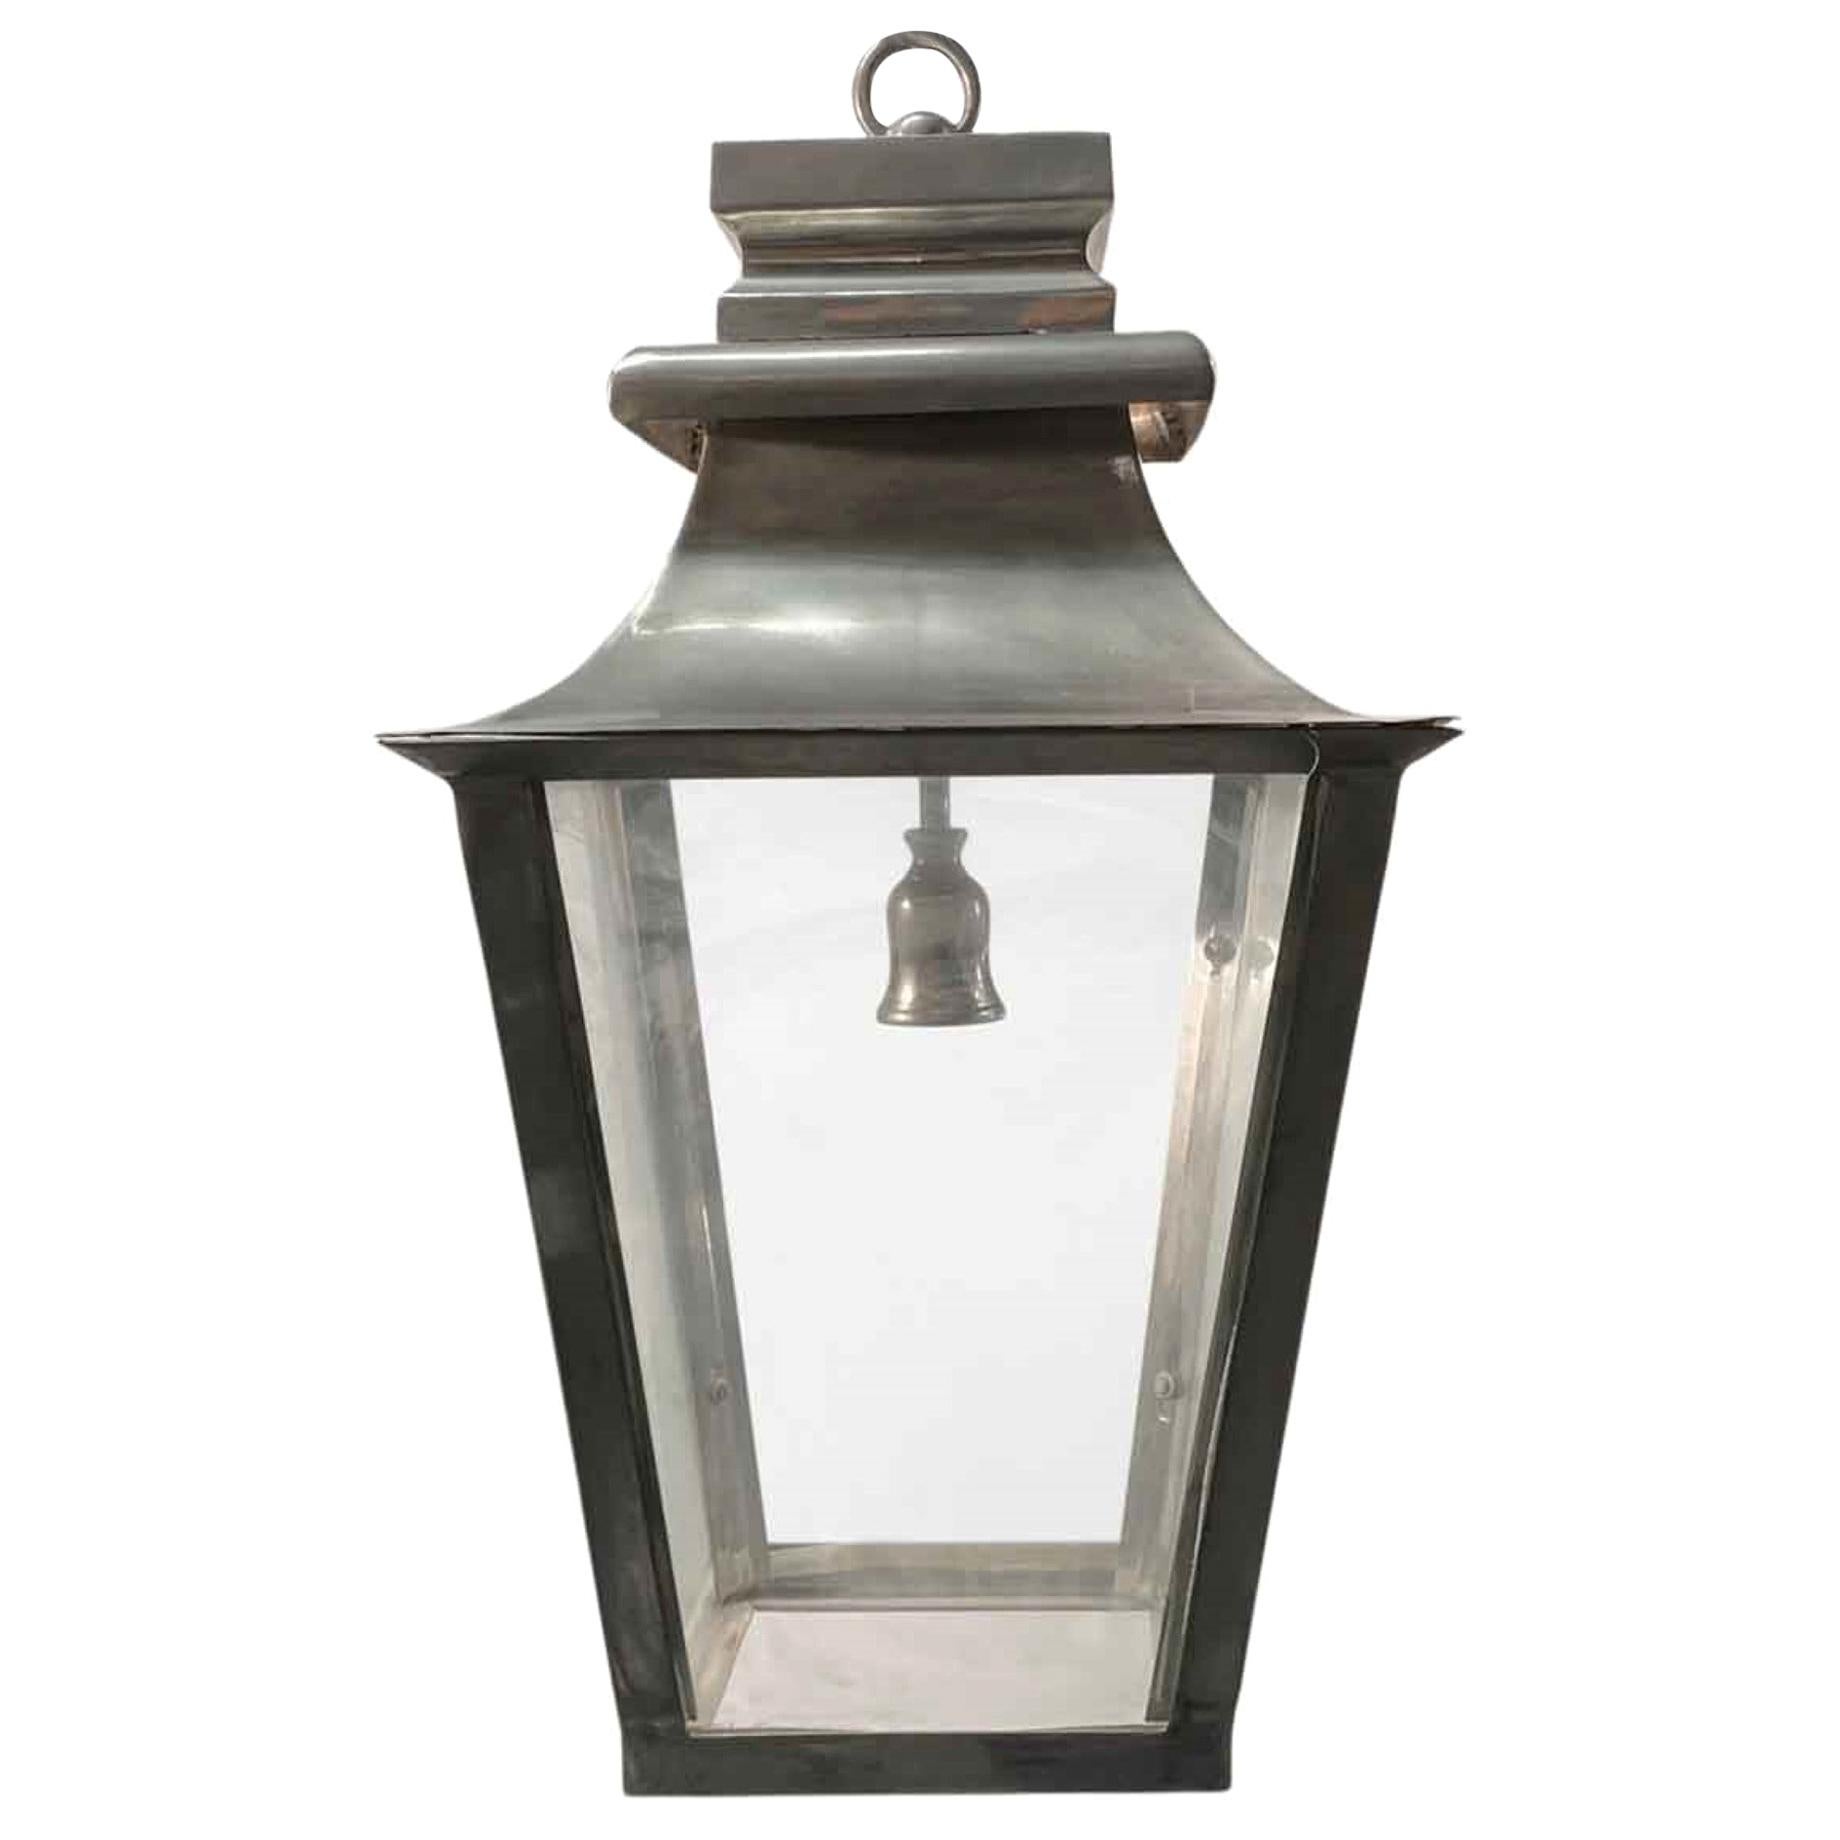 1990s Traditional Hanging Entry Porch Lantern Done in Brass with a Nickel Finish